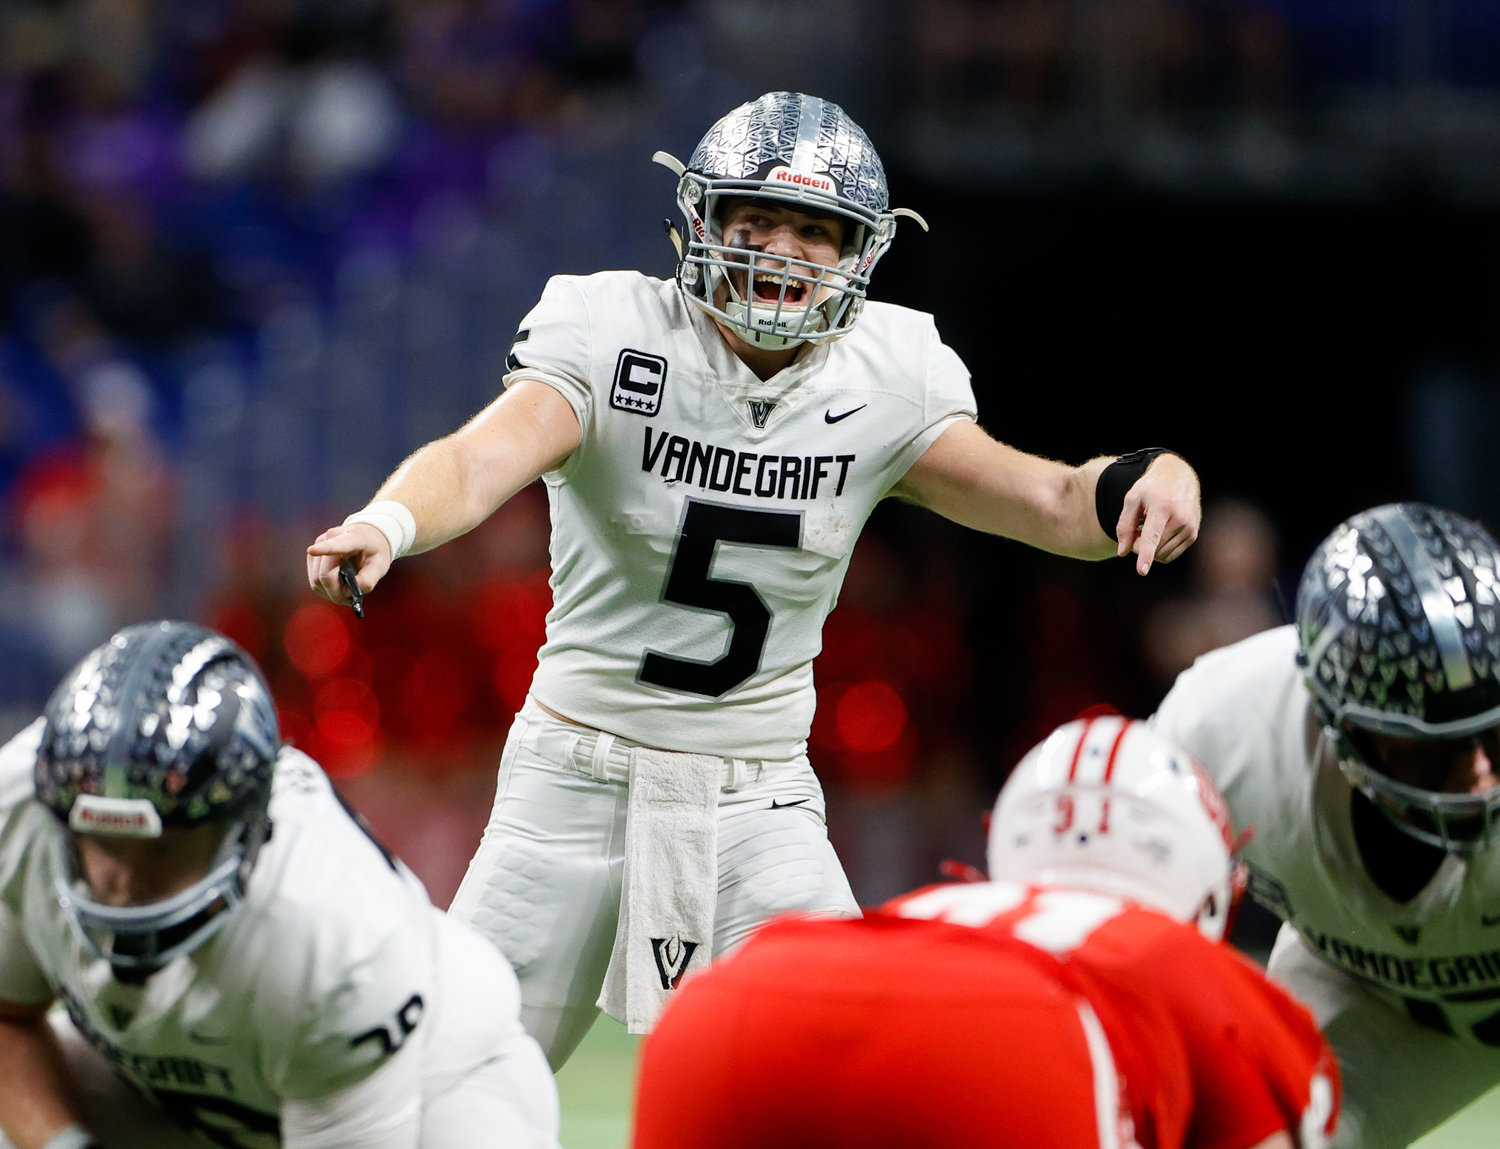 Vandegrift Vipers senior quarterback Brayden Buchanan (5) at the line of scrimmage during the Class 6A-DII state semifinal football game between Katy and Vandegrift on Dec. 10, 2022 in San Antonio.